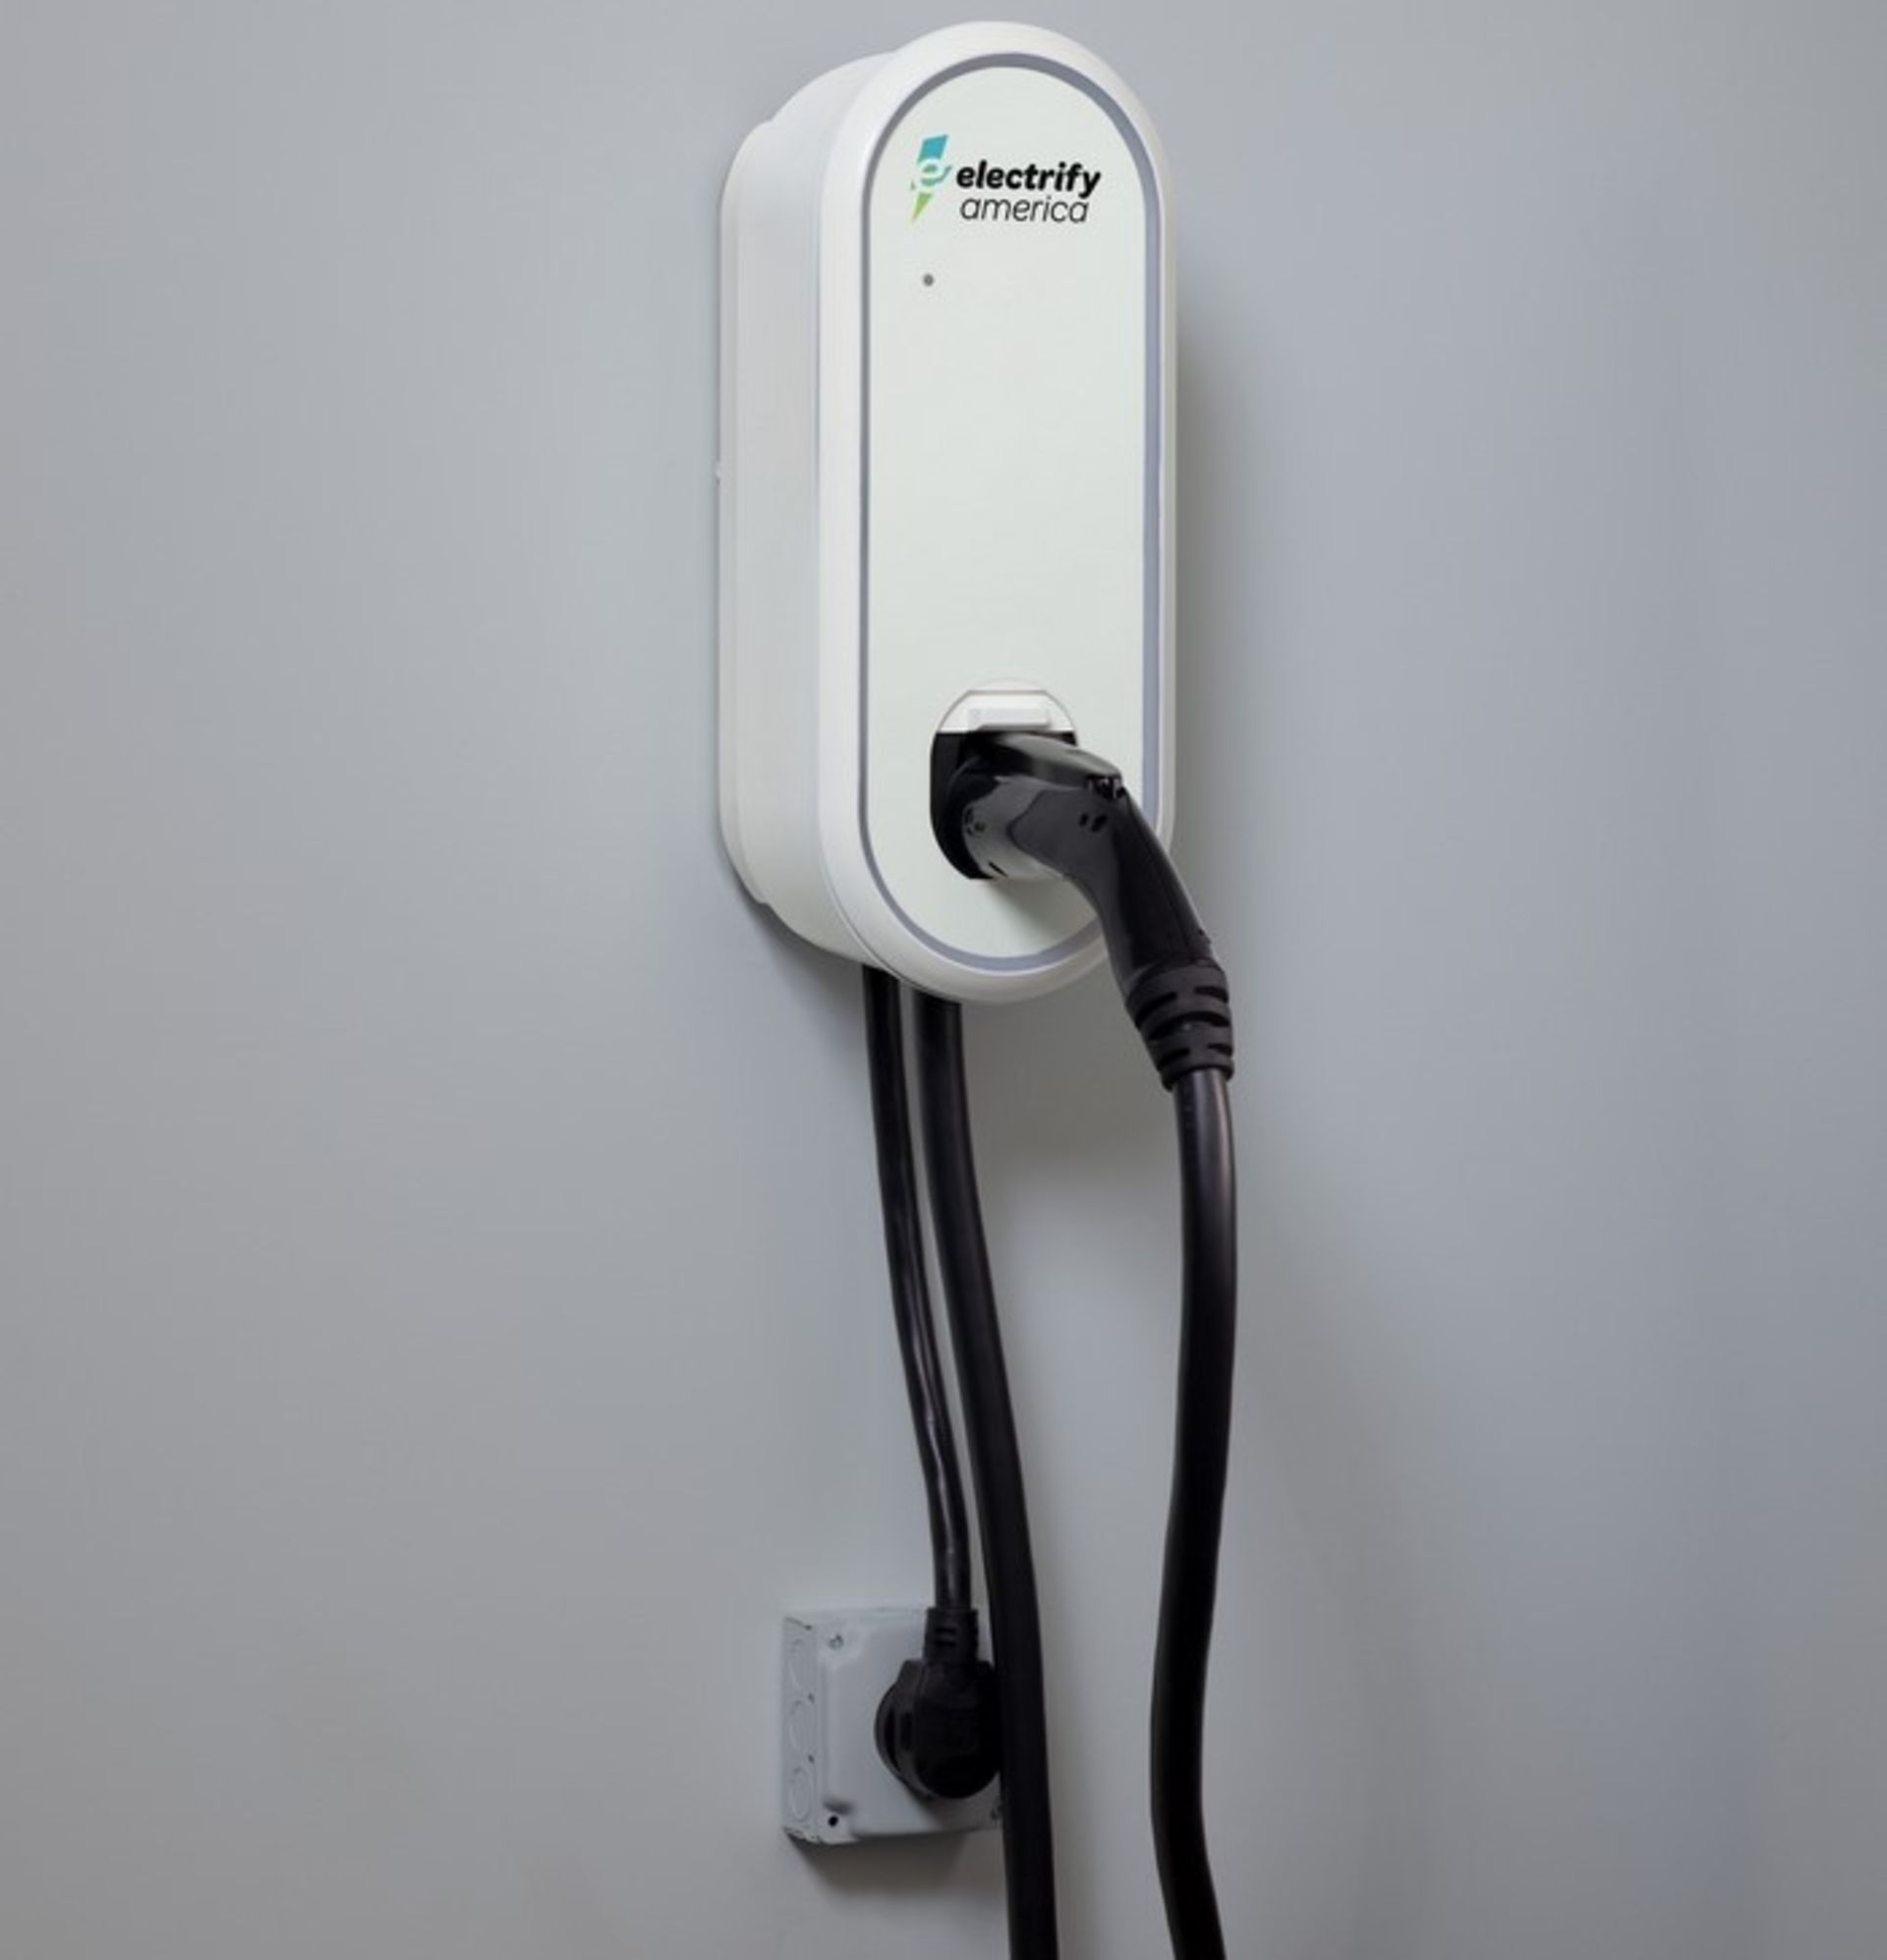 Electrify electric car home charger